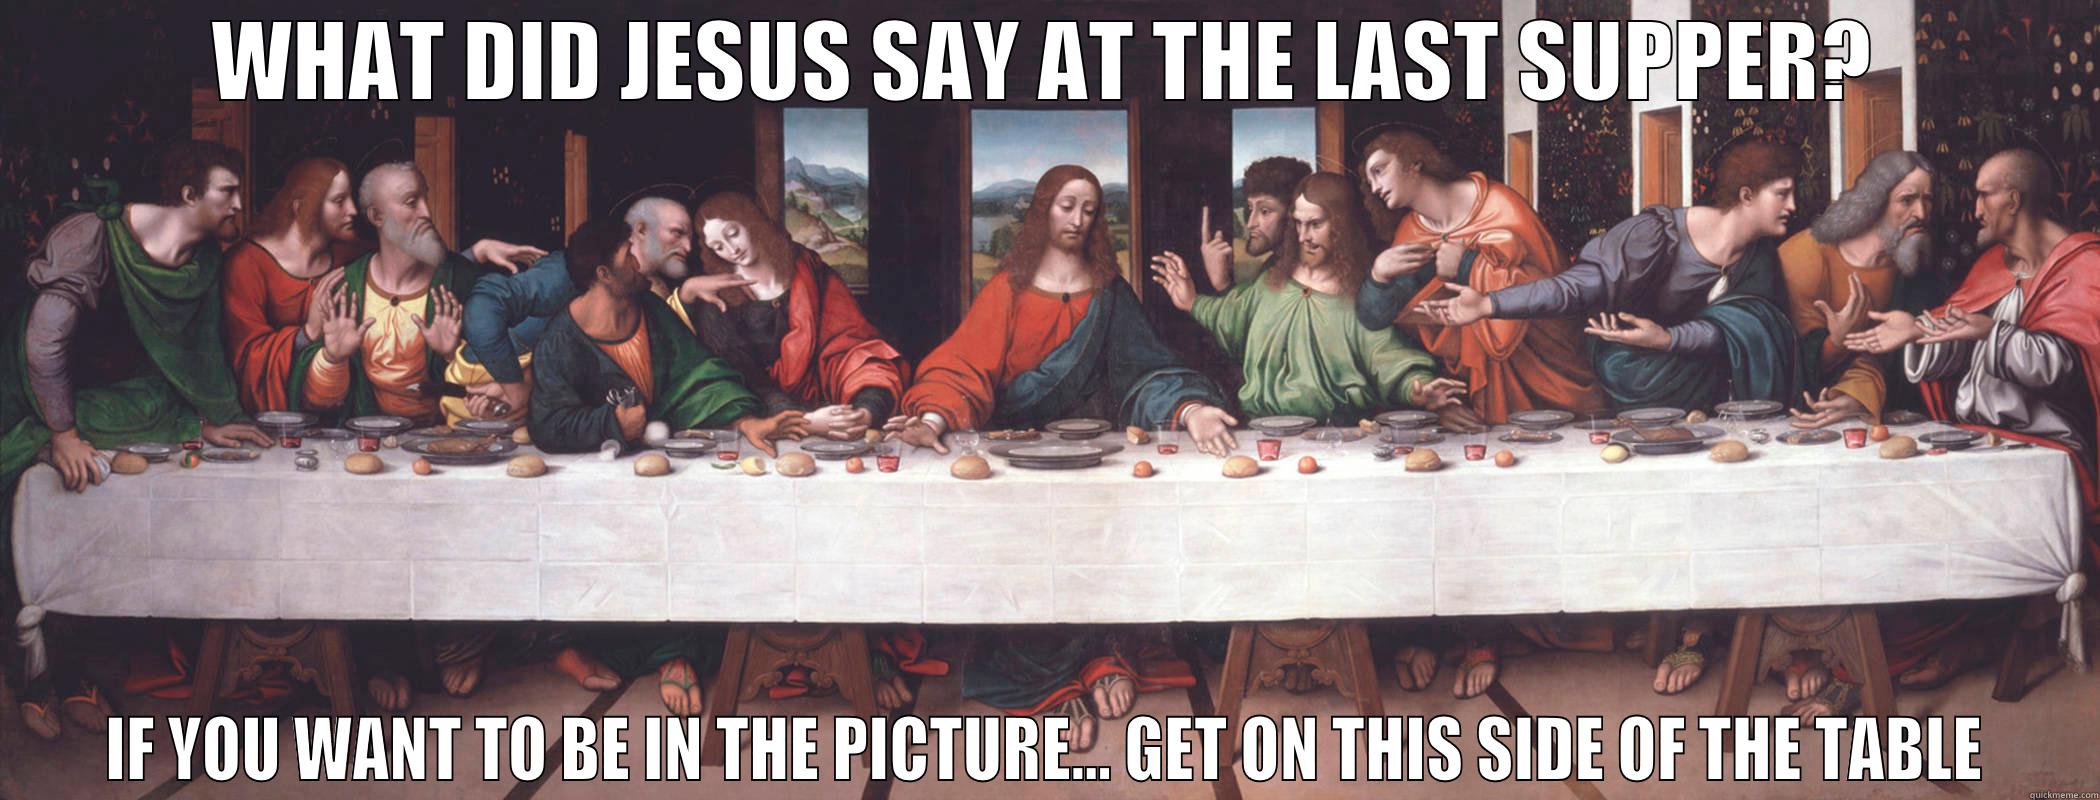 Best Religious Joke - WHAT DID JESUS SAY AT THE LAST SUPPER? IF YOU WANT TO BE IN THE PICTURE... GET ON THIS SIDE OF THE TABLE Misc